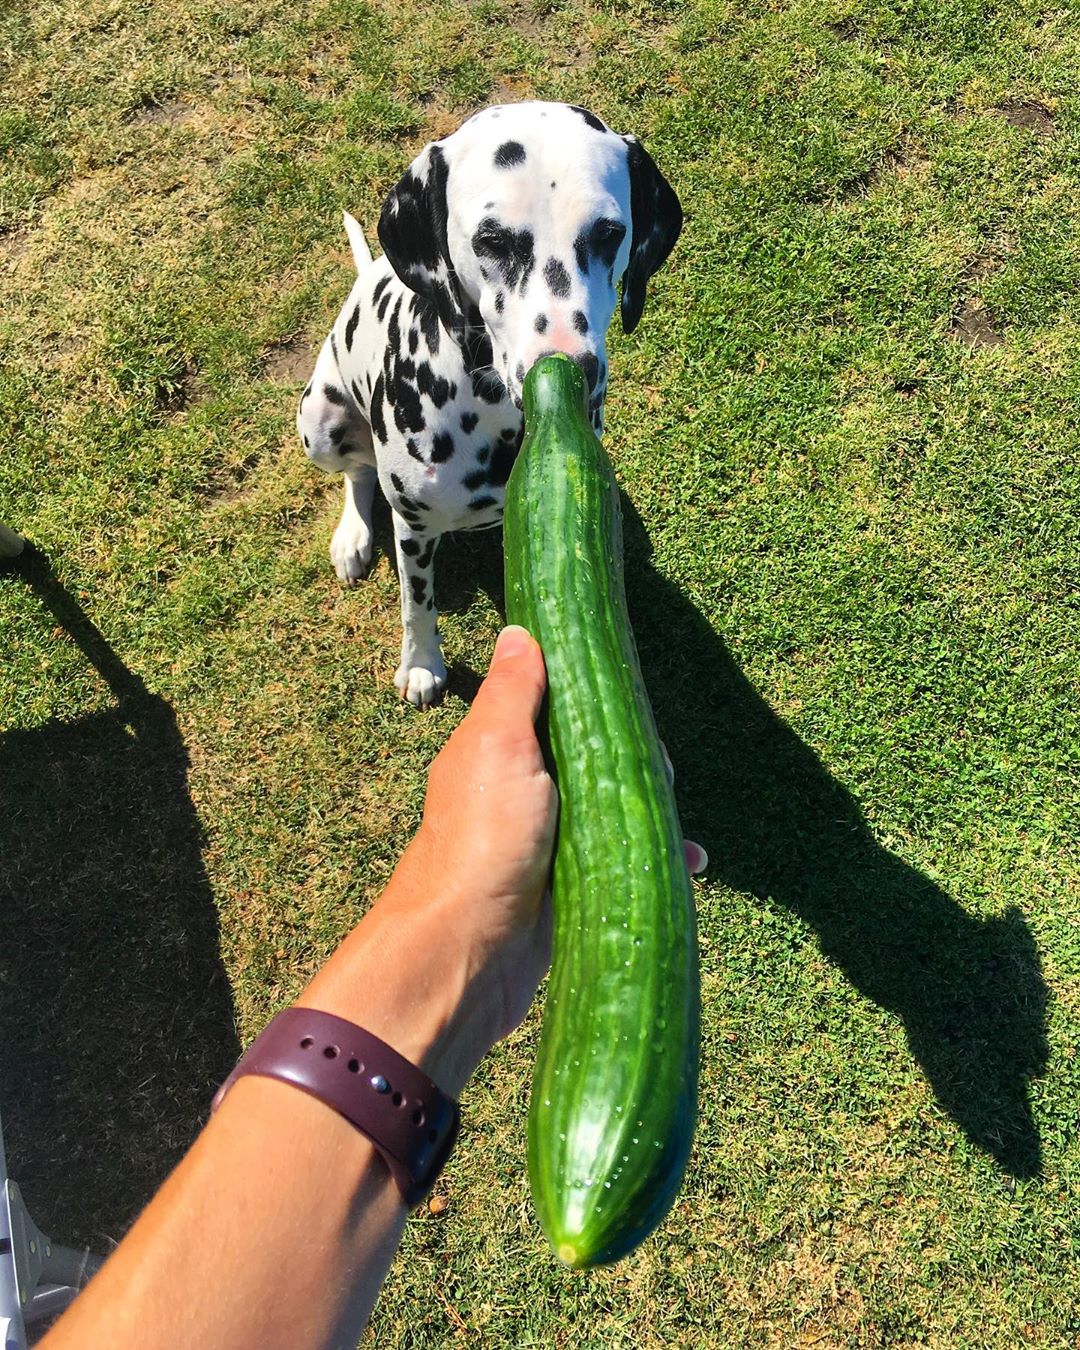 A Dalmatian sitting on the grass behind the cucumber in the hand of a man